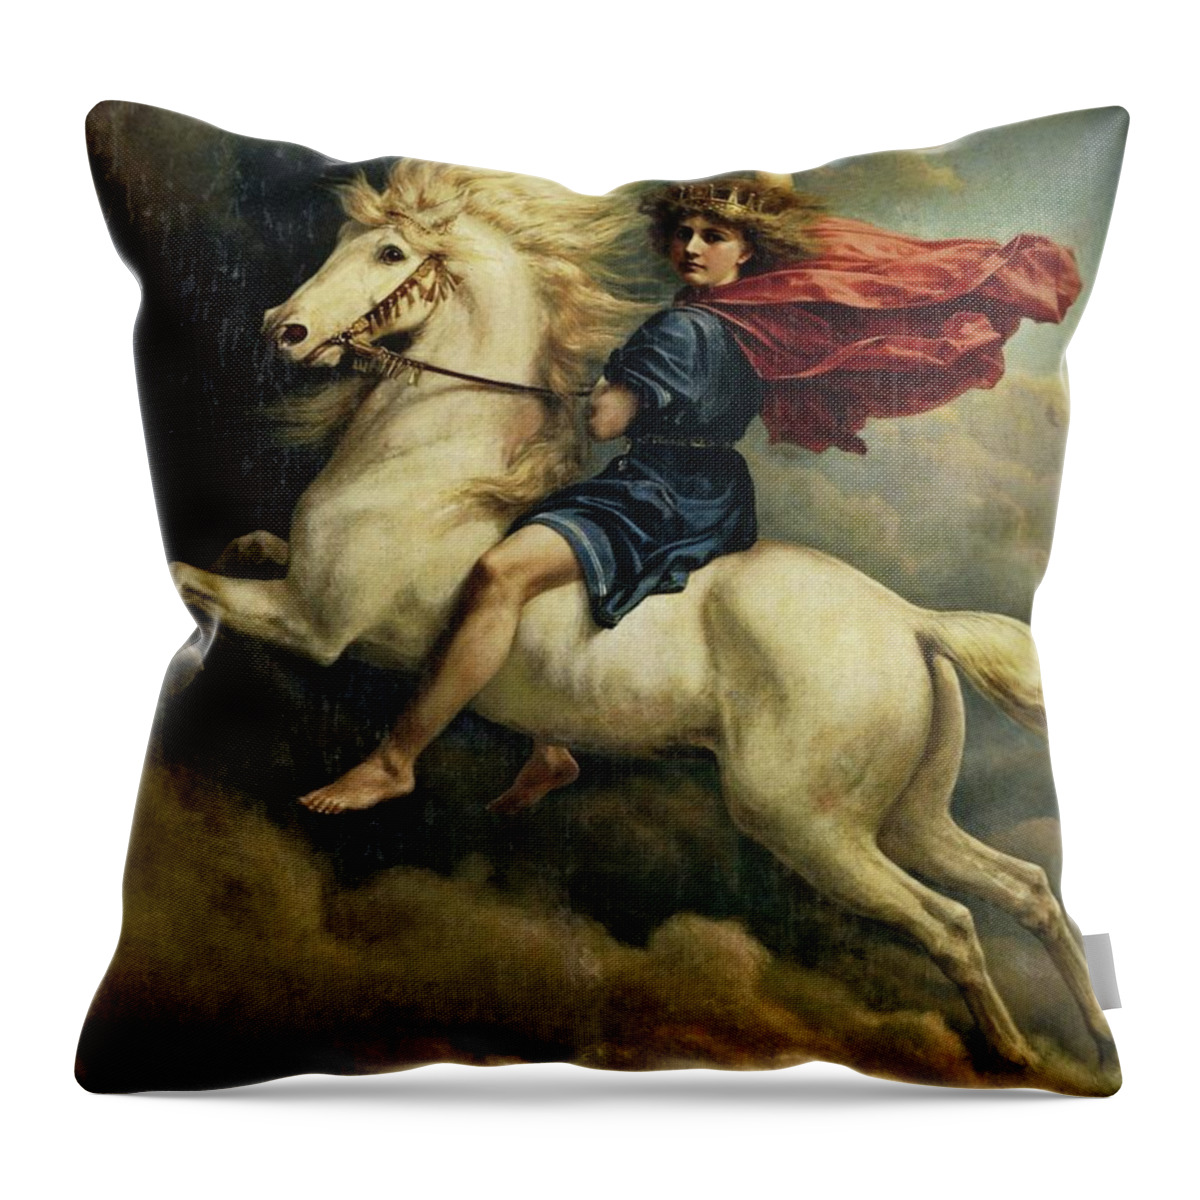 Dagr Throw Pillow featuring the painting Dagr by Peter Nicolai Arbo